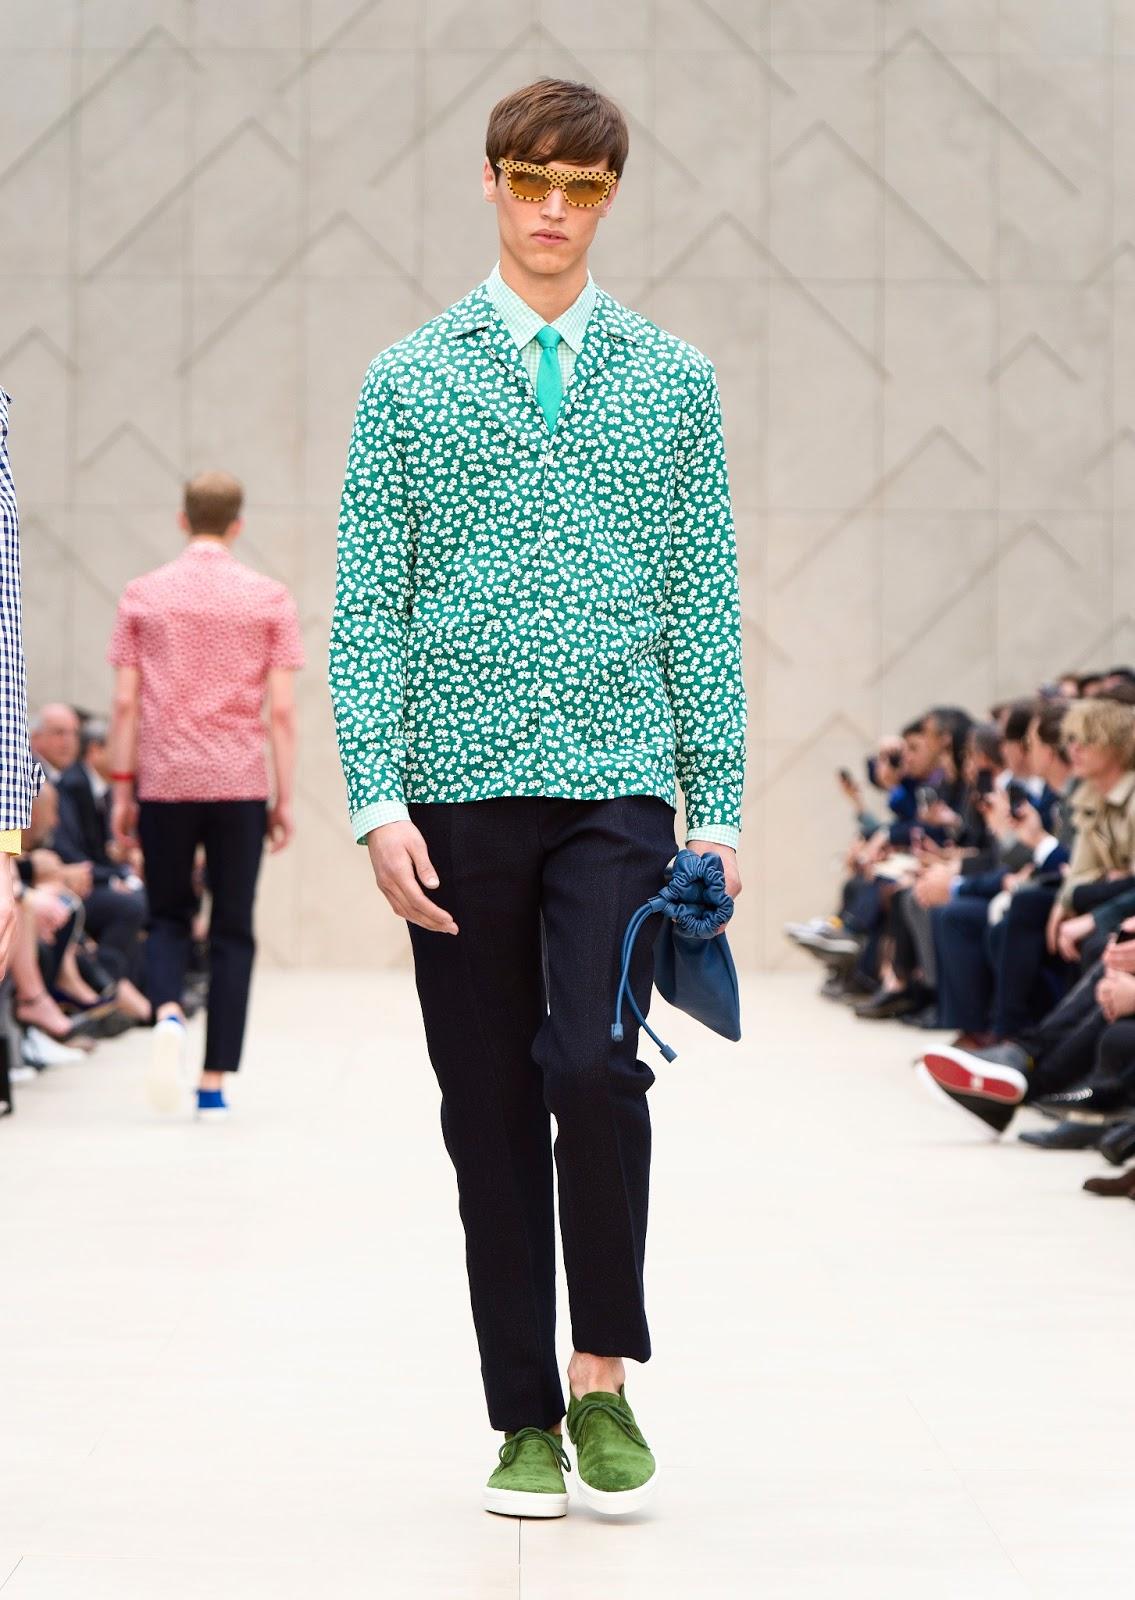 Burberry Prorsum SS14: 'Writers and Painters'